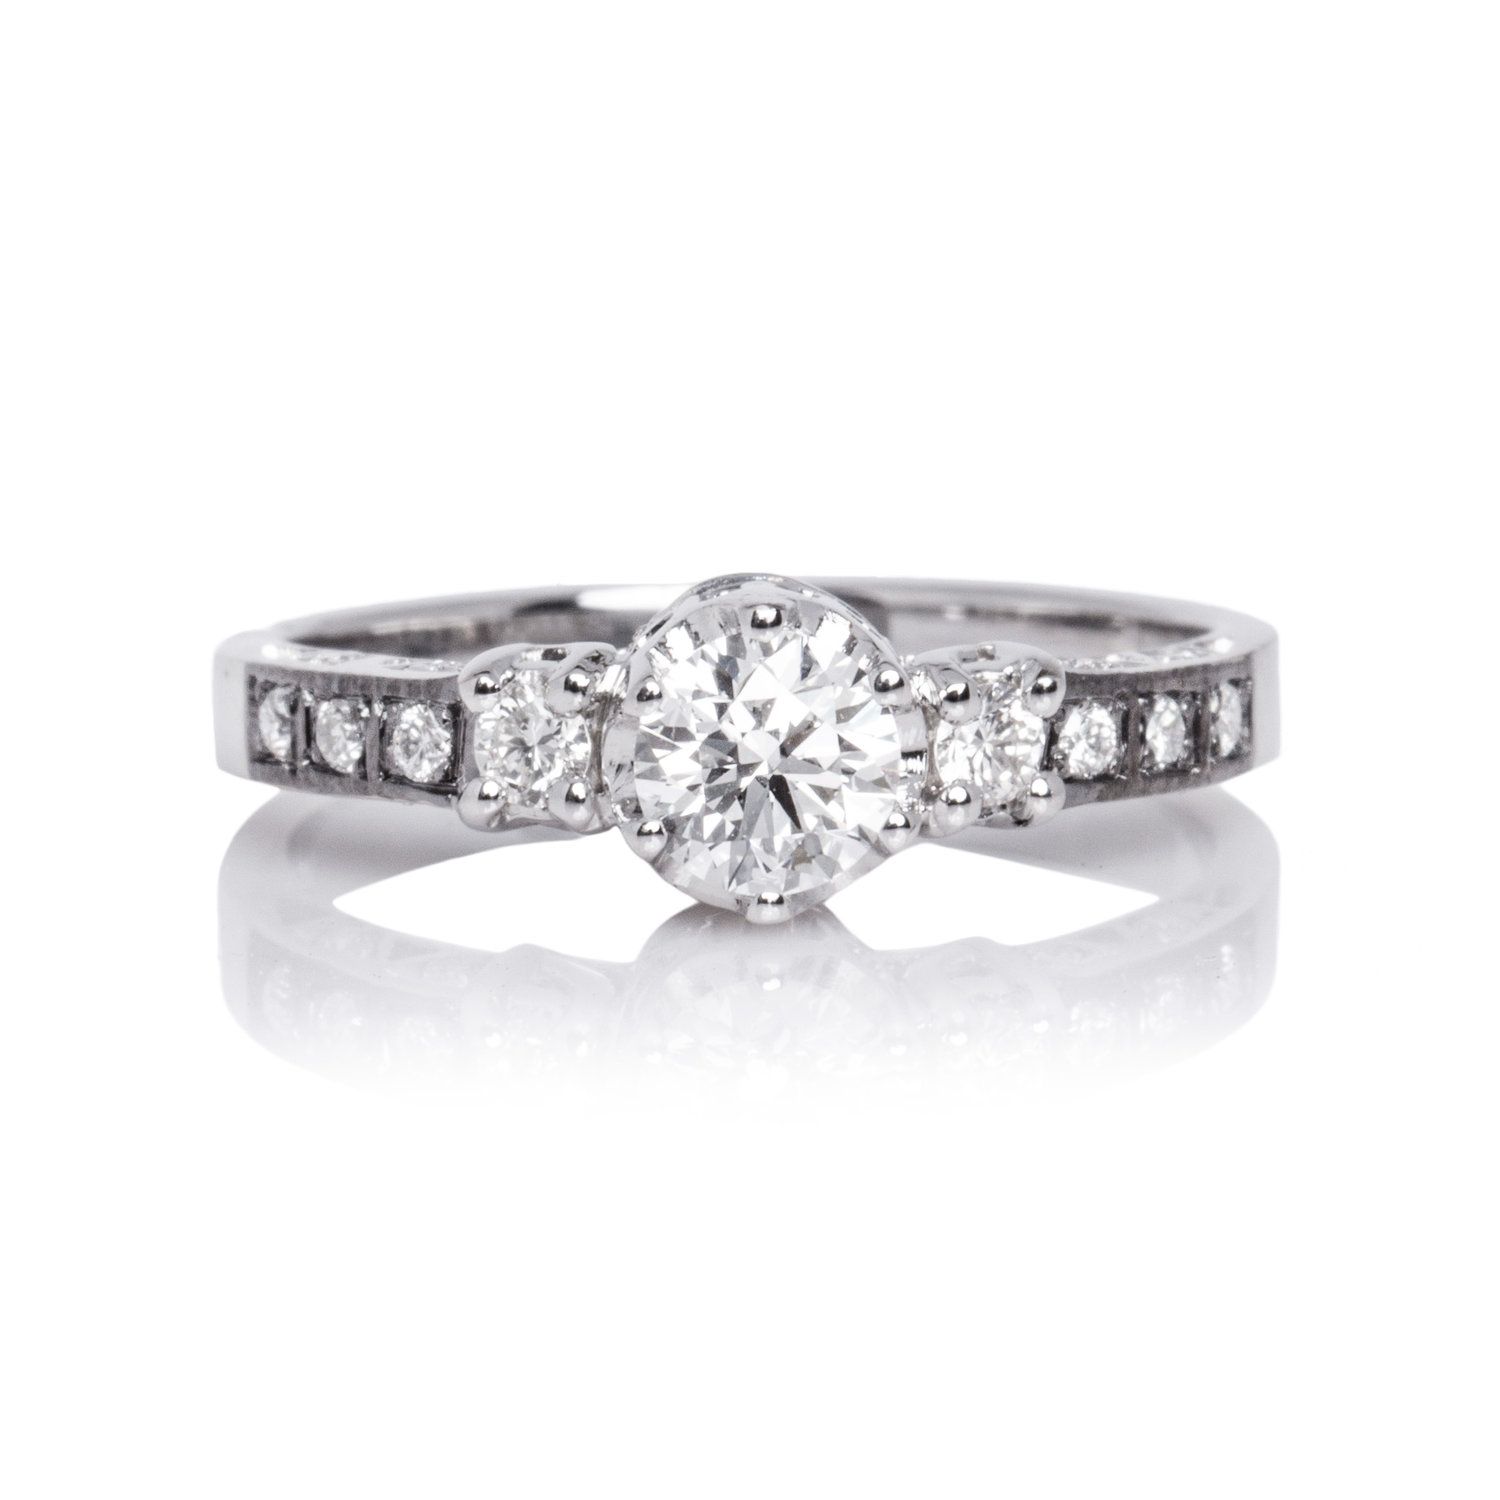 47-continental-jewels-manufacturers-ring-cjr000047-18k-white-gold-vvs1-solitaire-diamonds-customised-ring.jpg